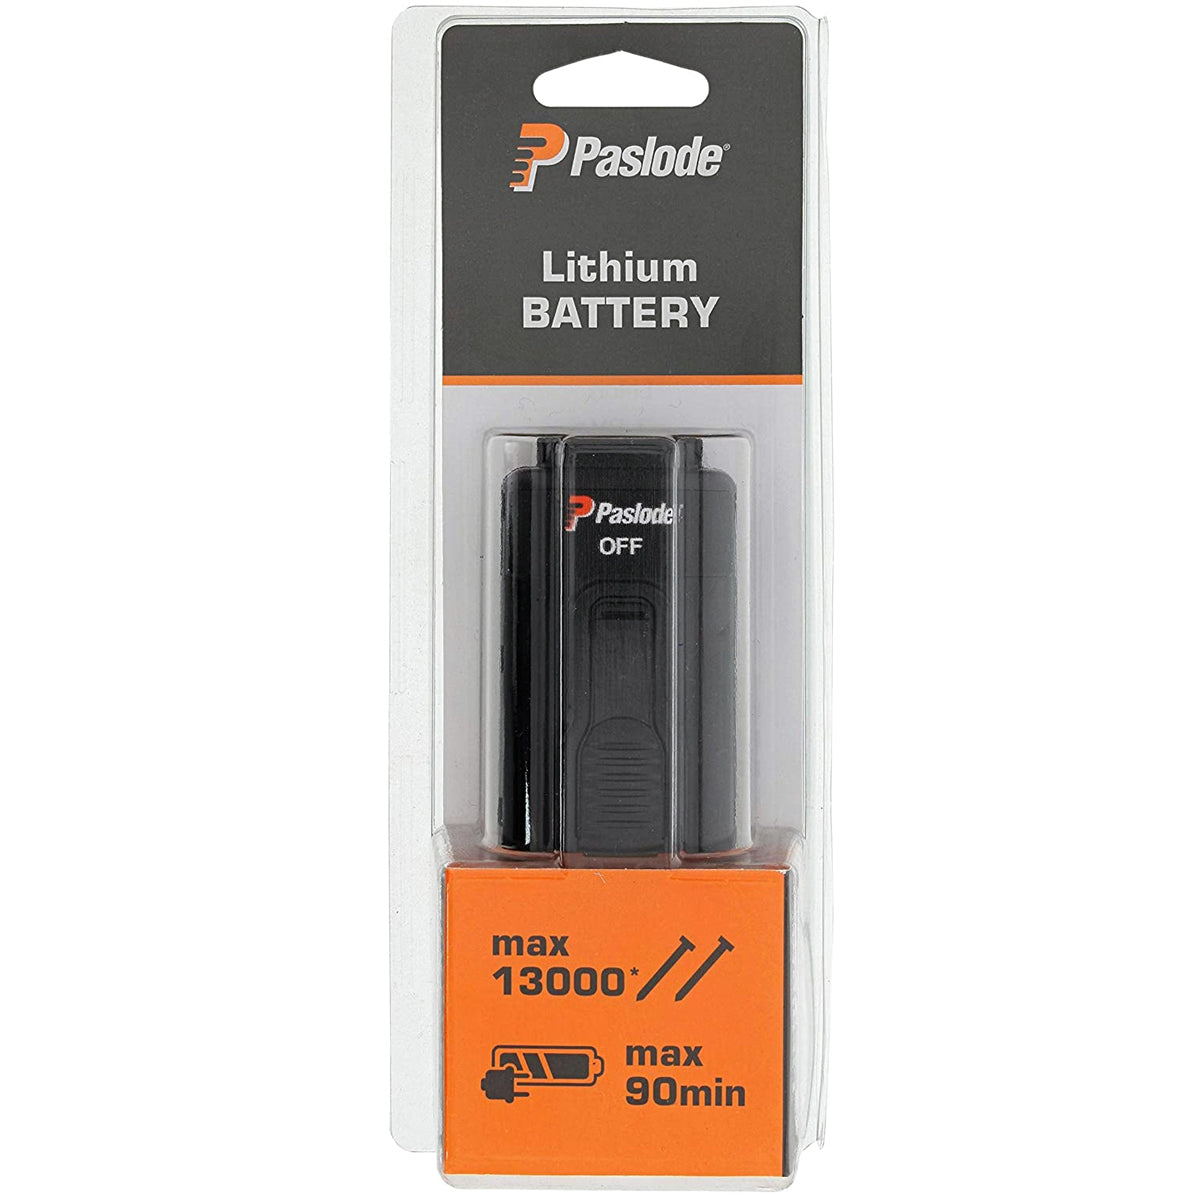 Paslode 018880 7.4V Lithium Battery Cell 2.1Ah for IM65, IM65A, PPN35Ci & IM360Ci